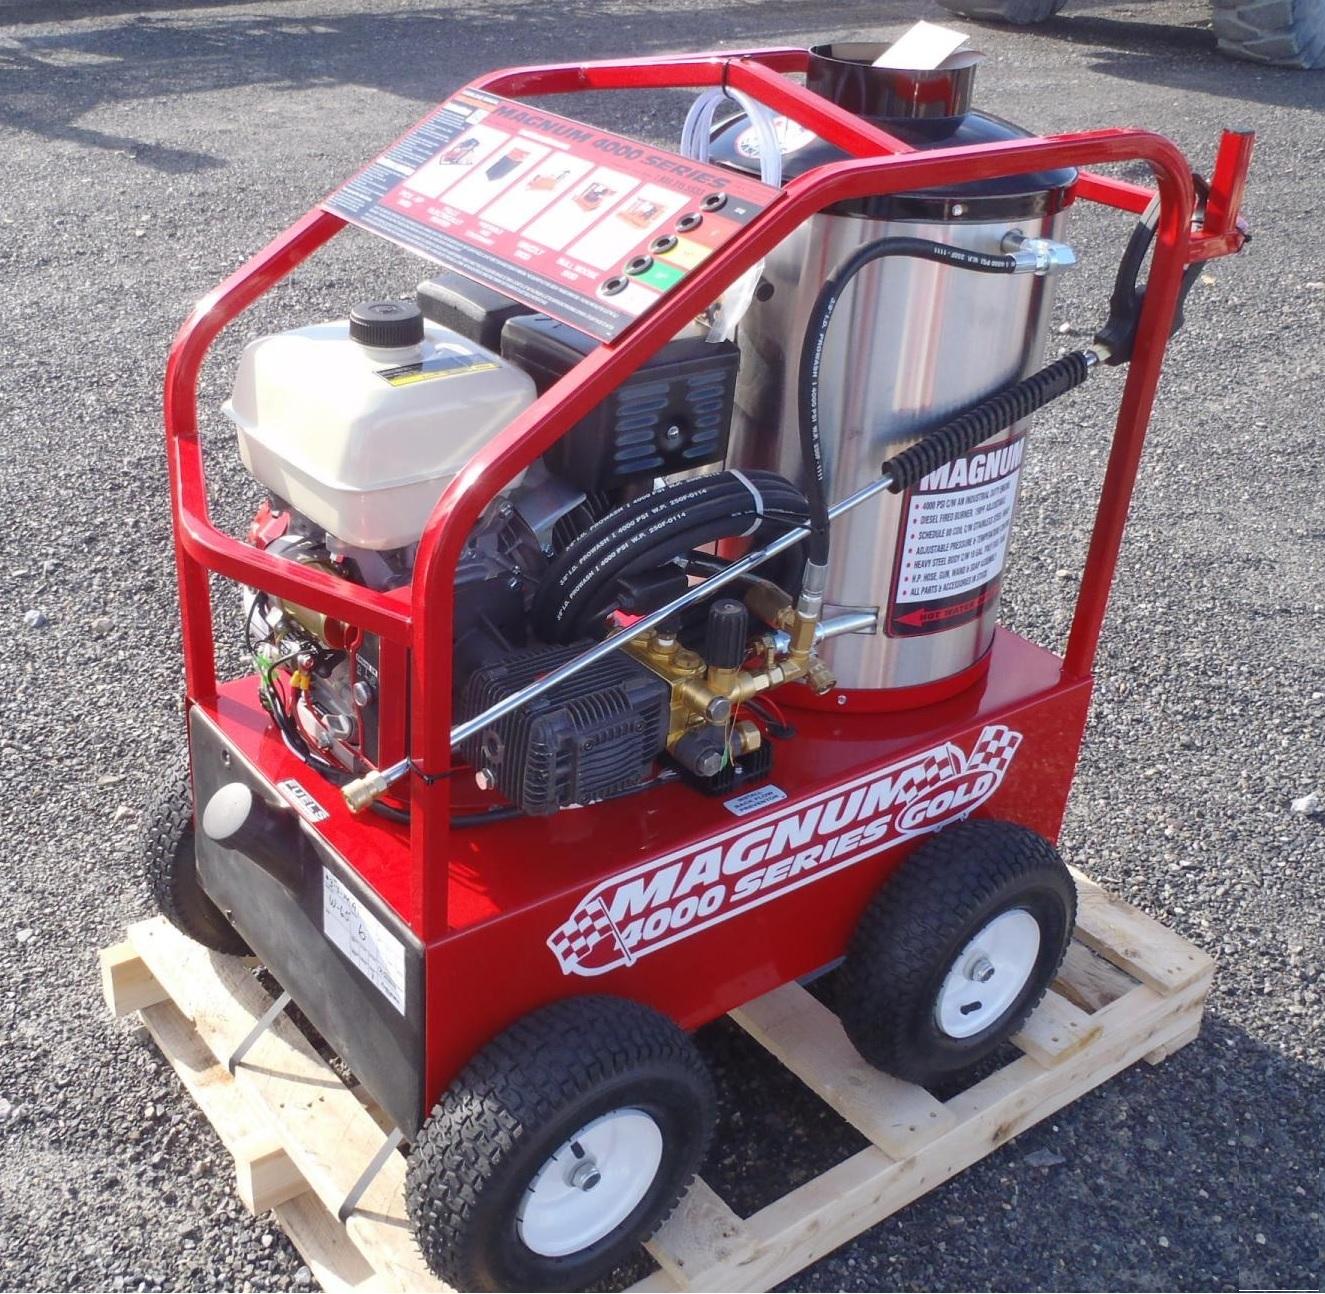 NEW MAGNUM 4000 GOLD HOT WATER PRESSURE WASHER, S/N: 211515